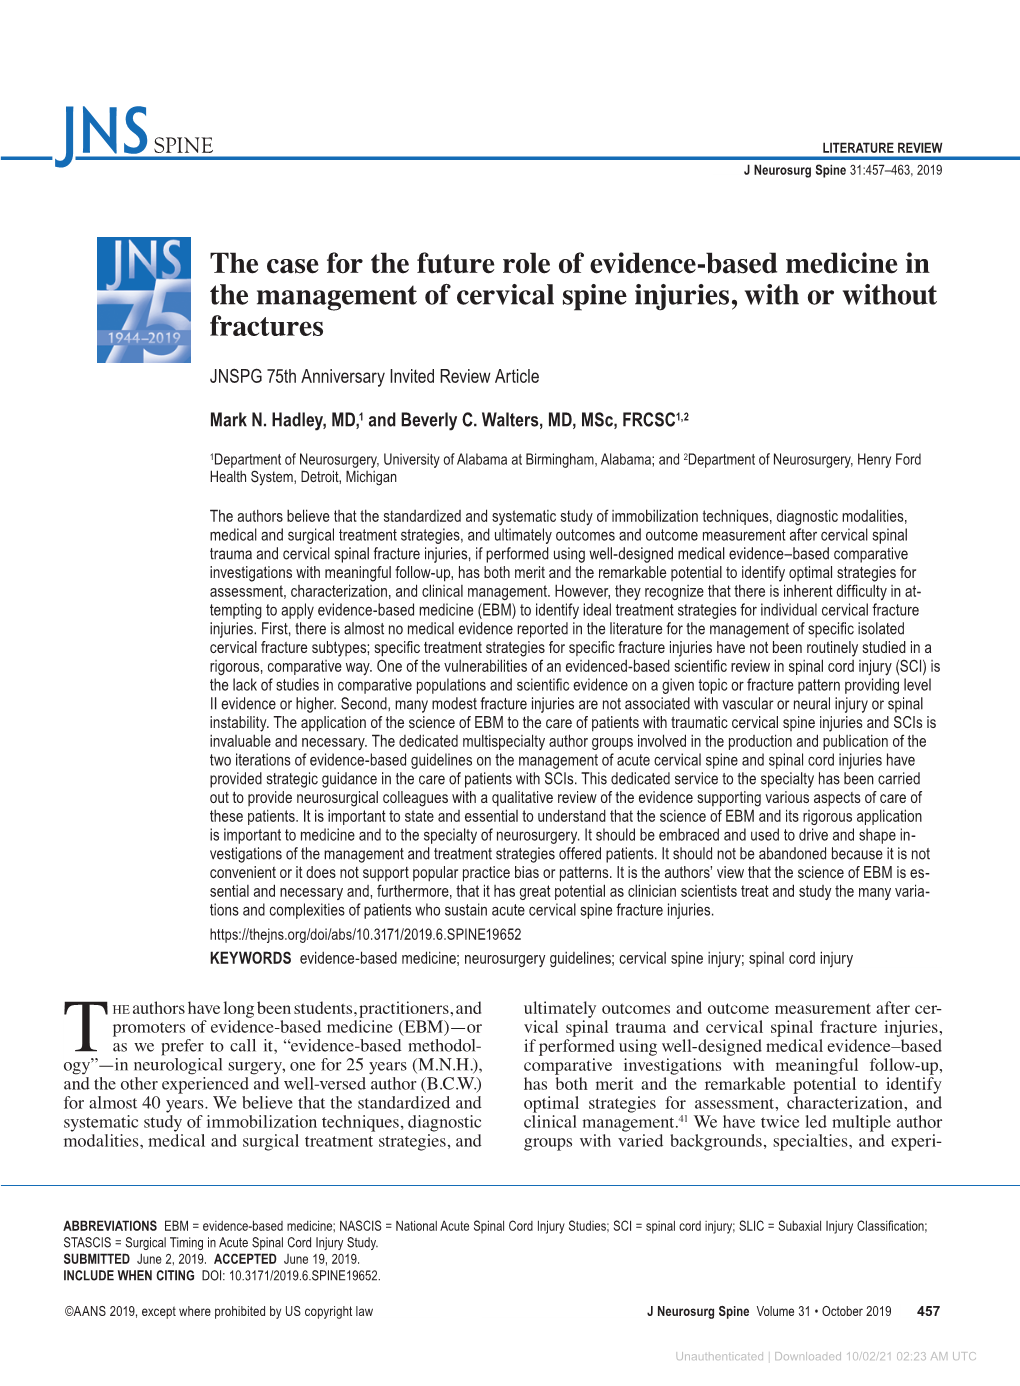 The Case for the Future Role of Evidence-Based Medicine in the Management of Cervical Spine Injuries, with Or Without Fractures